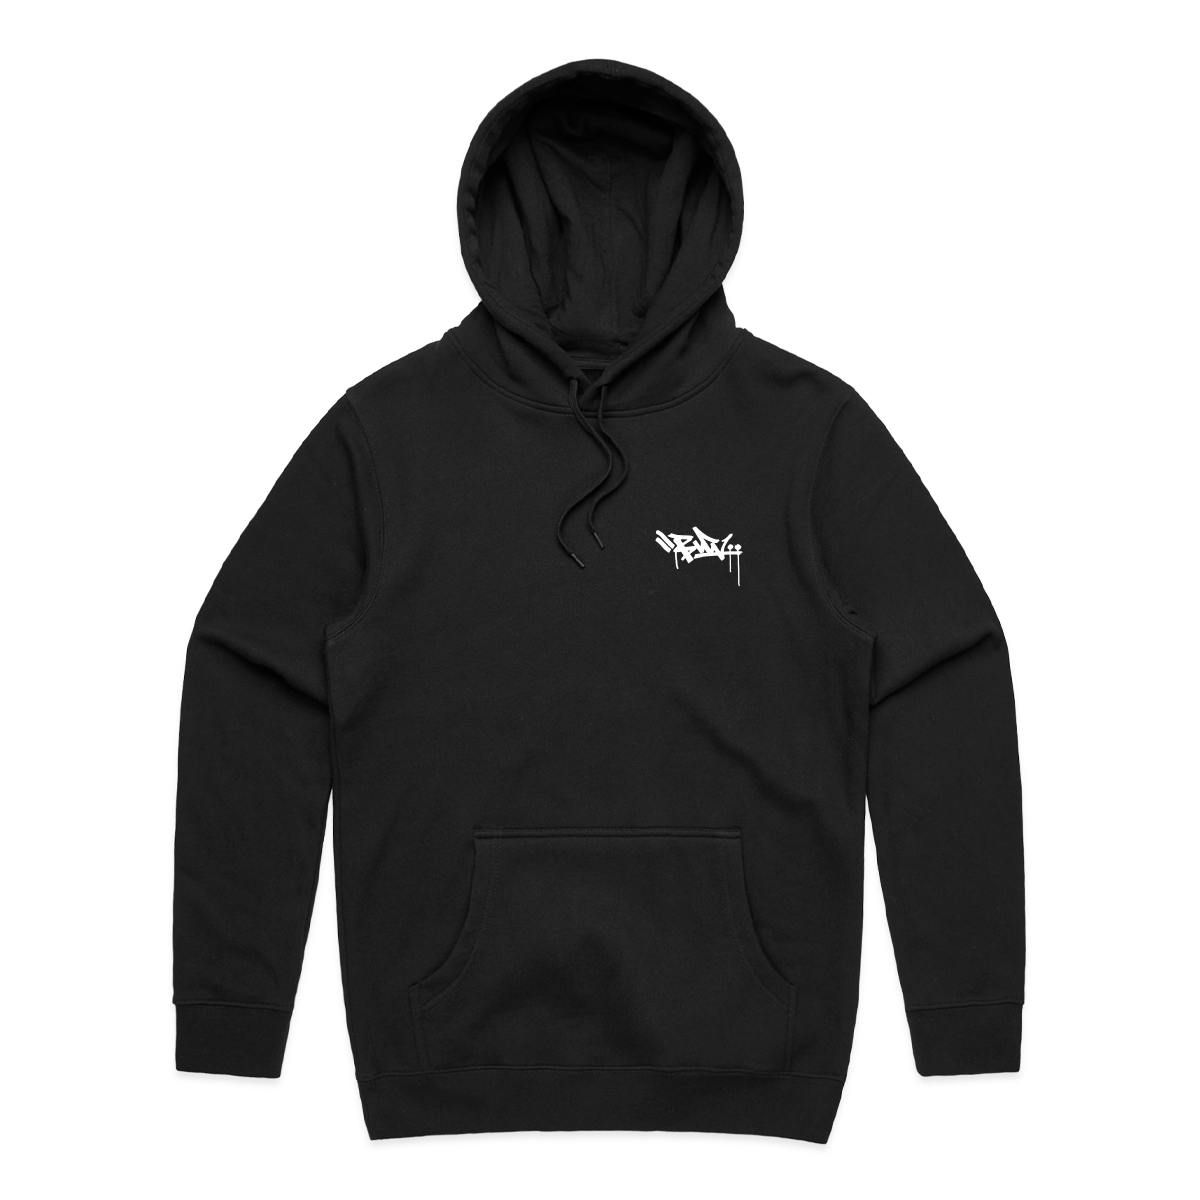 TAG - Black Embroidered Heavyweight Hoodie - Size S Only – Burn Clothing